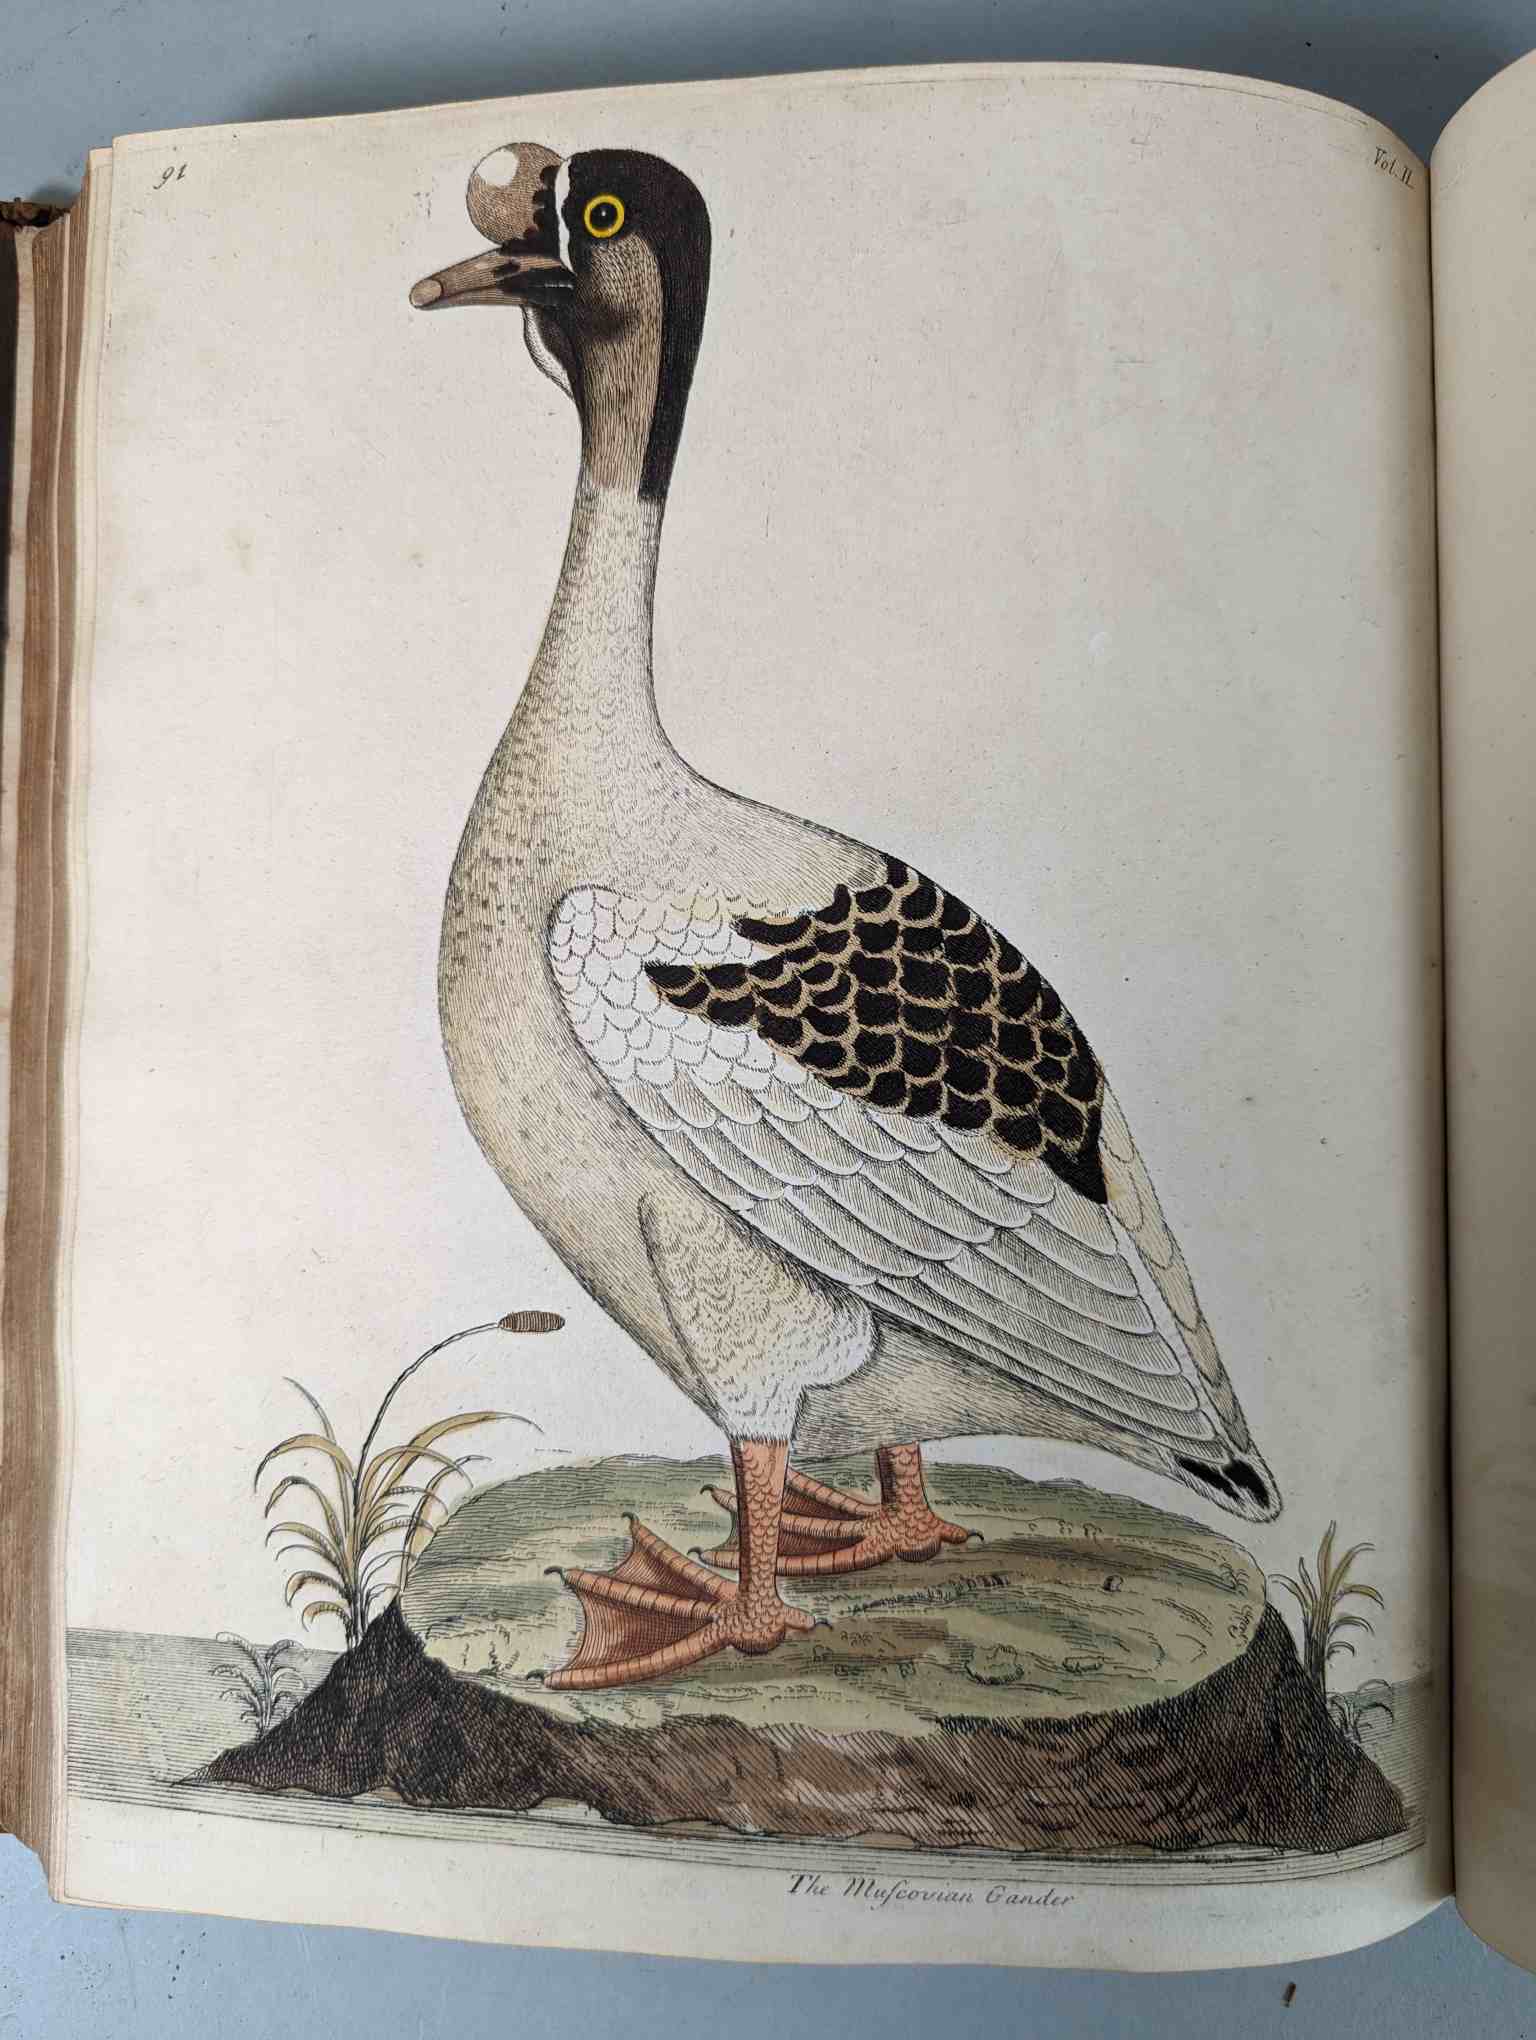 ALBIN, Eleazar. A Natural History of Birds, to which are added, Notes and Observations by W. - Image 195 of 208